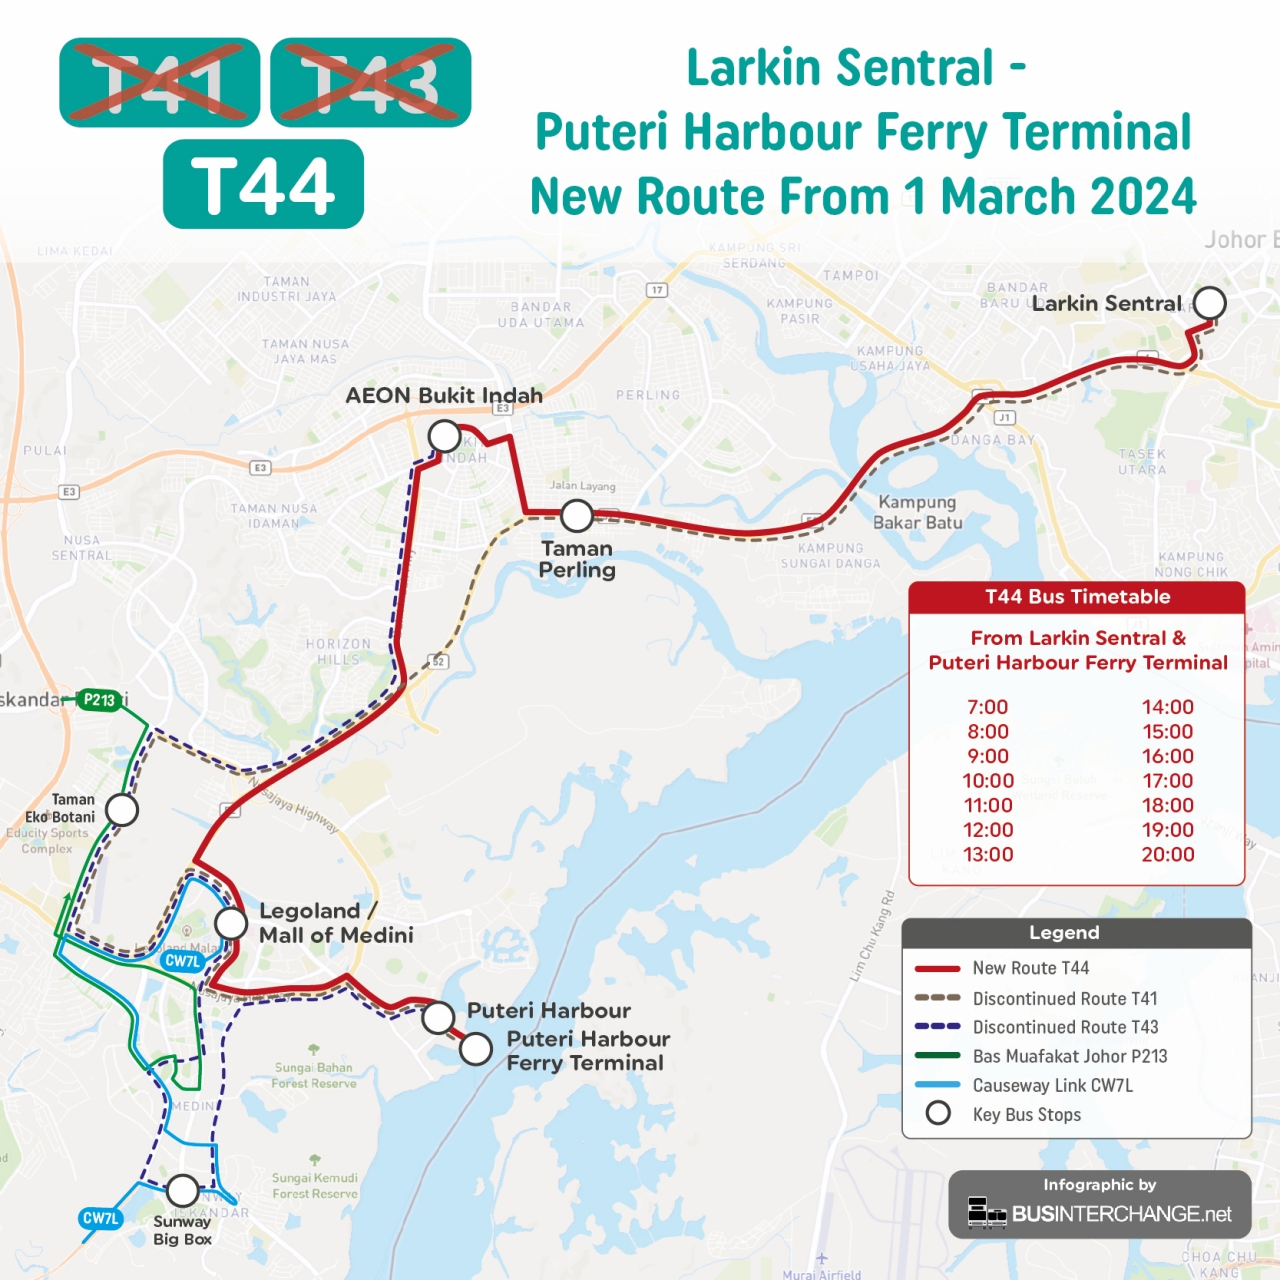 myBas Johor Bahru Route T41 to discontinue from 1 March 2024